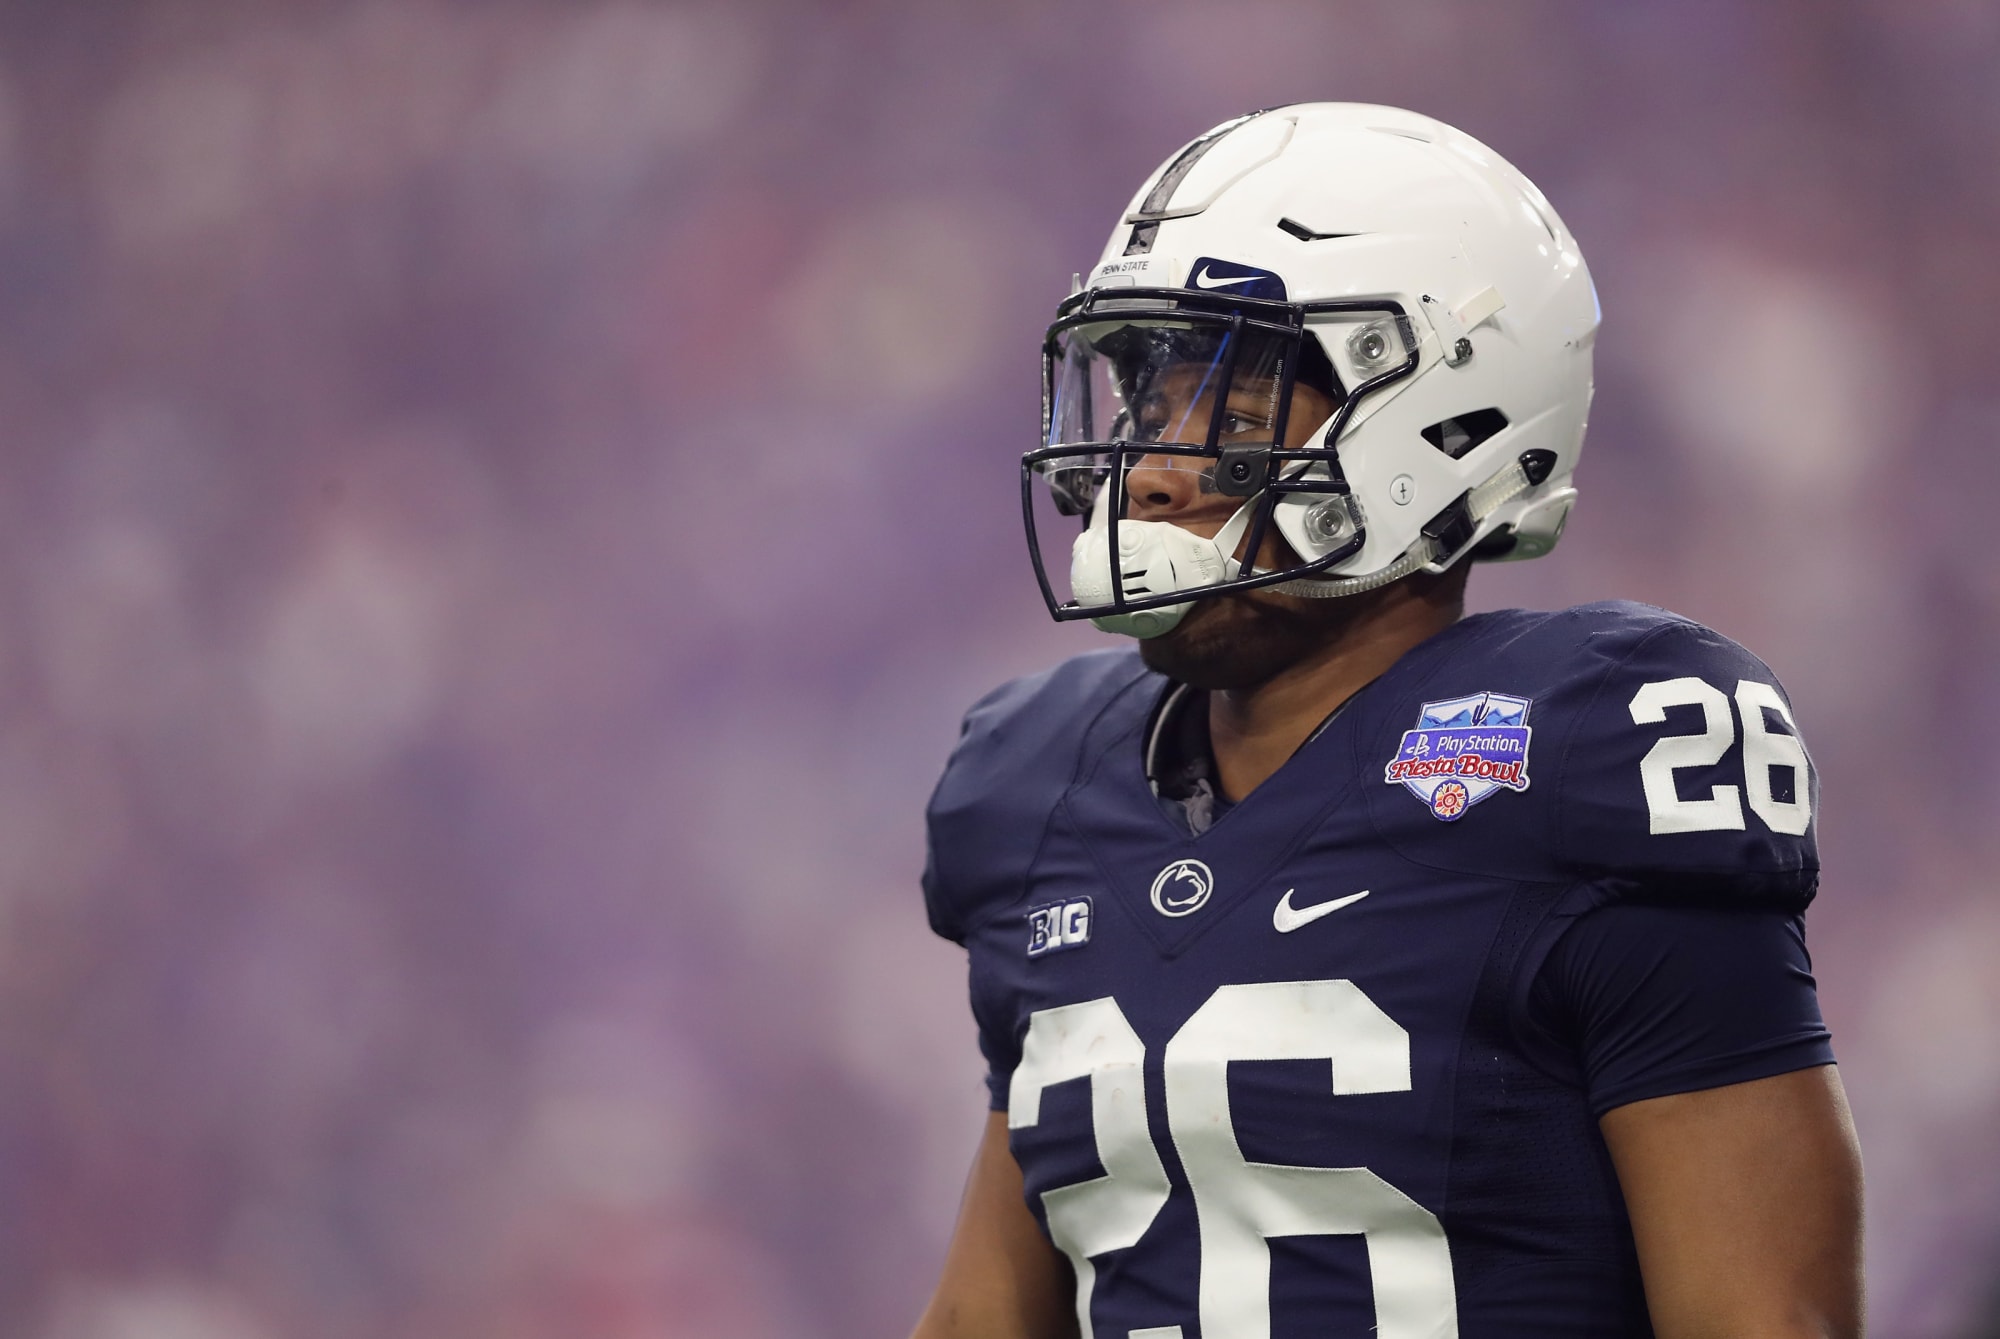 Penn State Football Top 10 players in program history